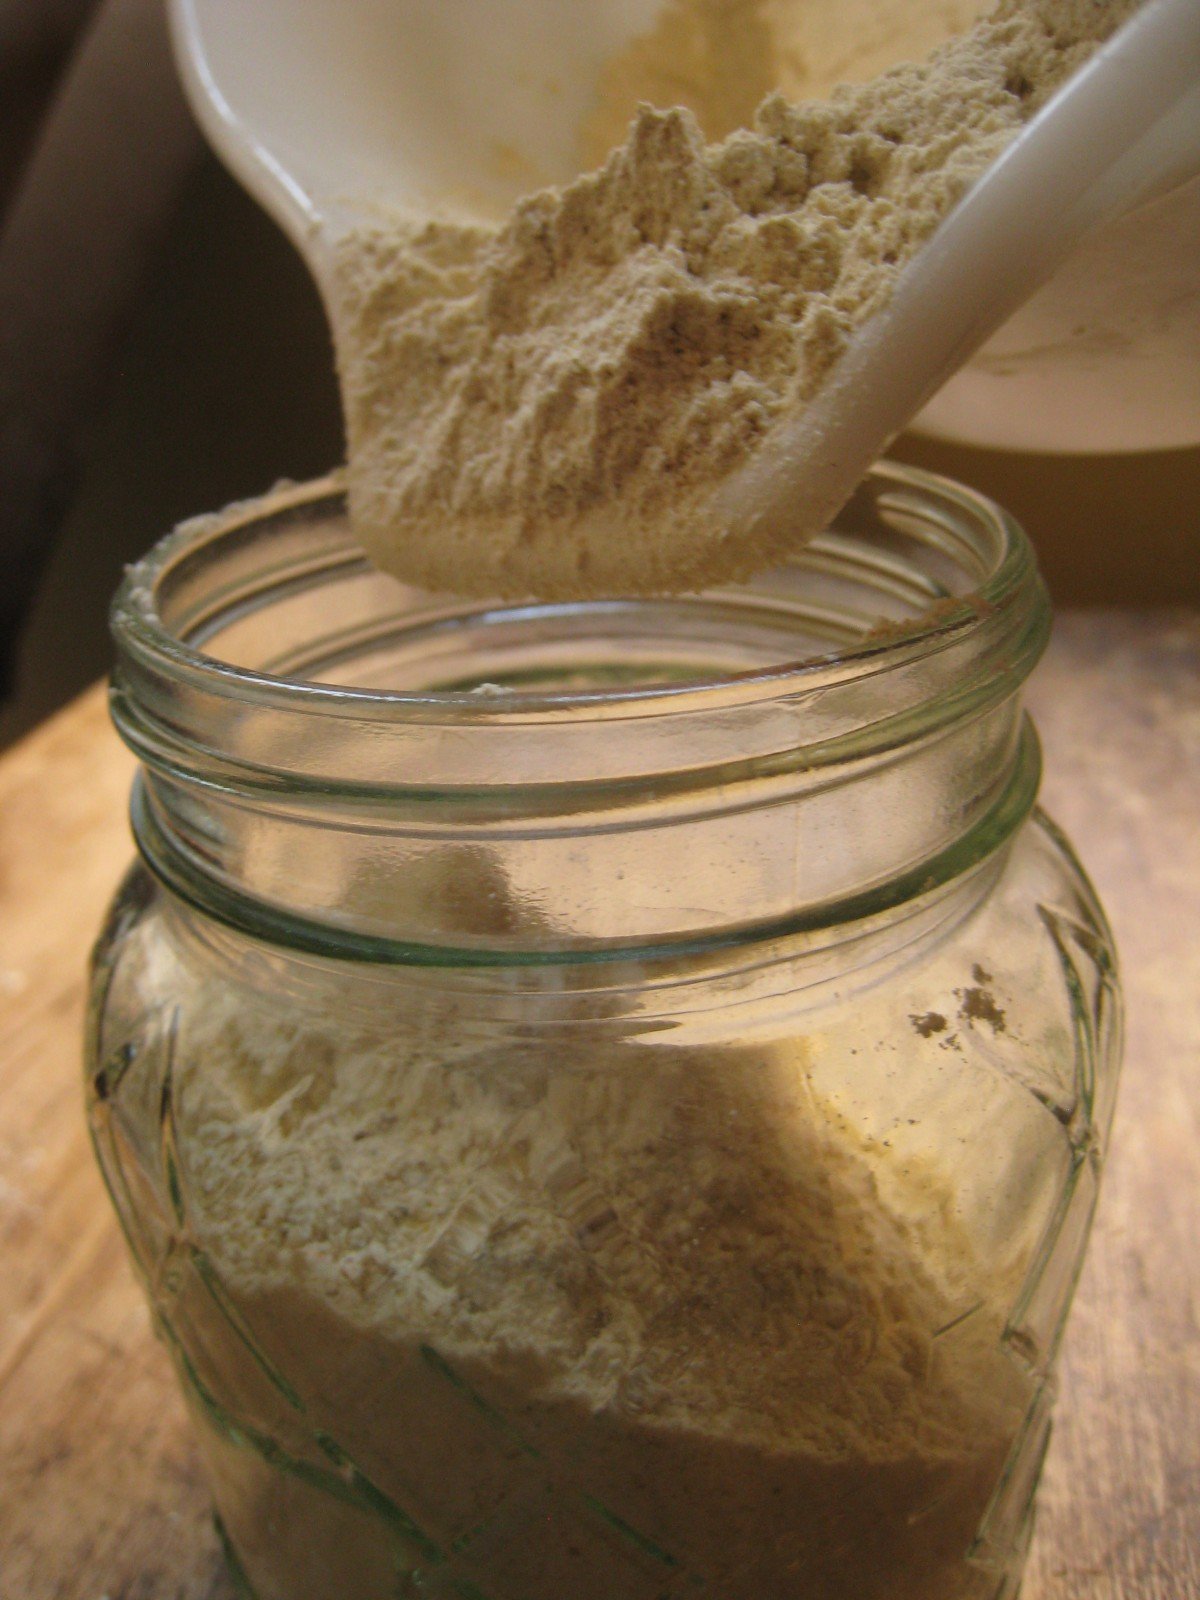 Foraging: How to Make Your Own Gluten-Free Mesquite Pod Flour